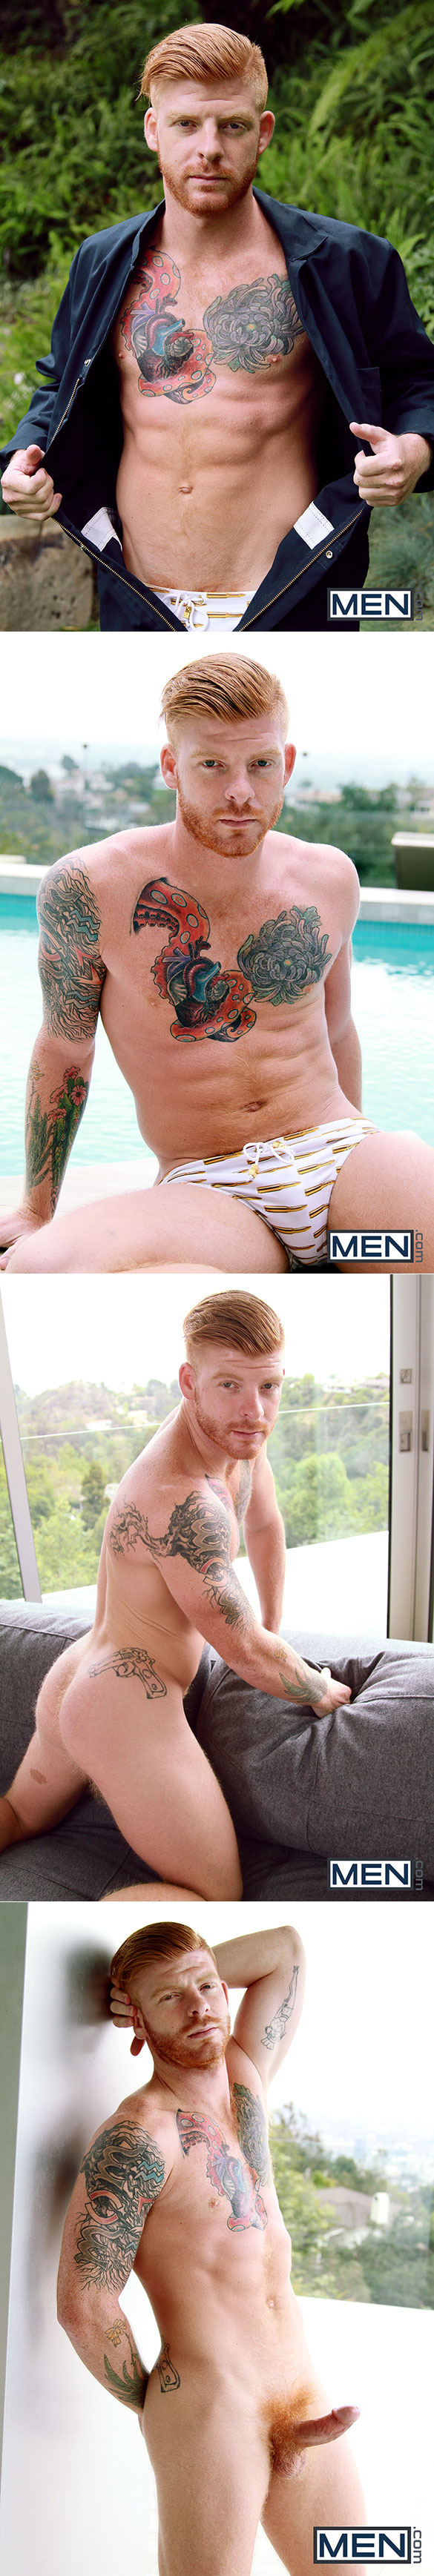 Men.com: Will Braun fucks Bennett Anthony in "The Real Houseboys of West Hollywood, Part 2"